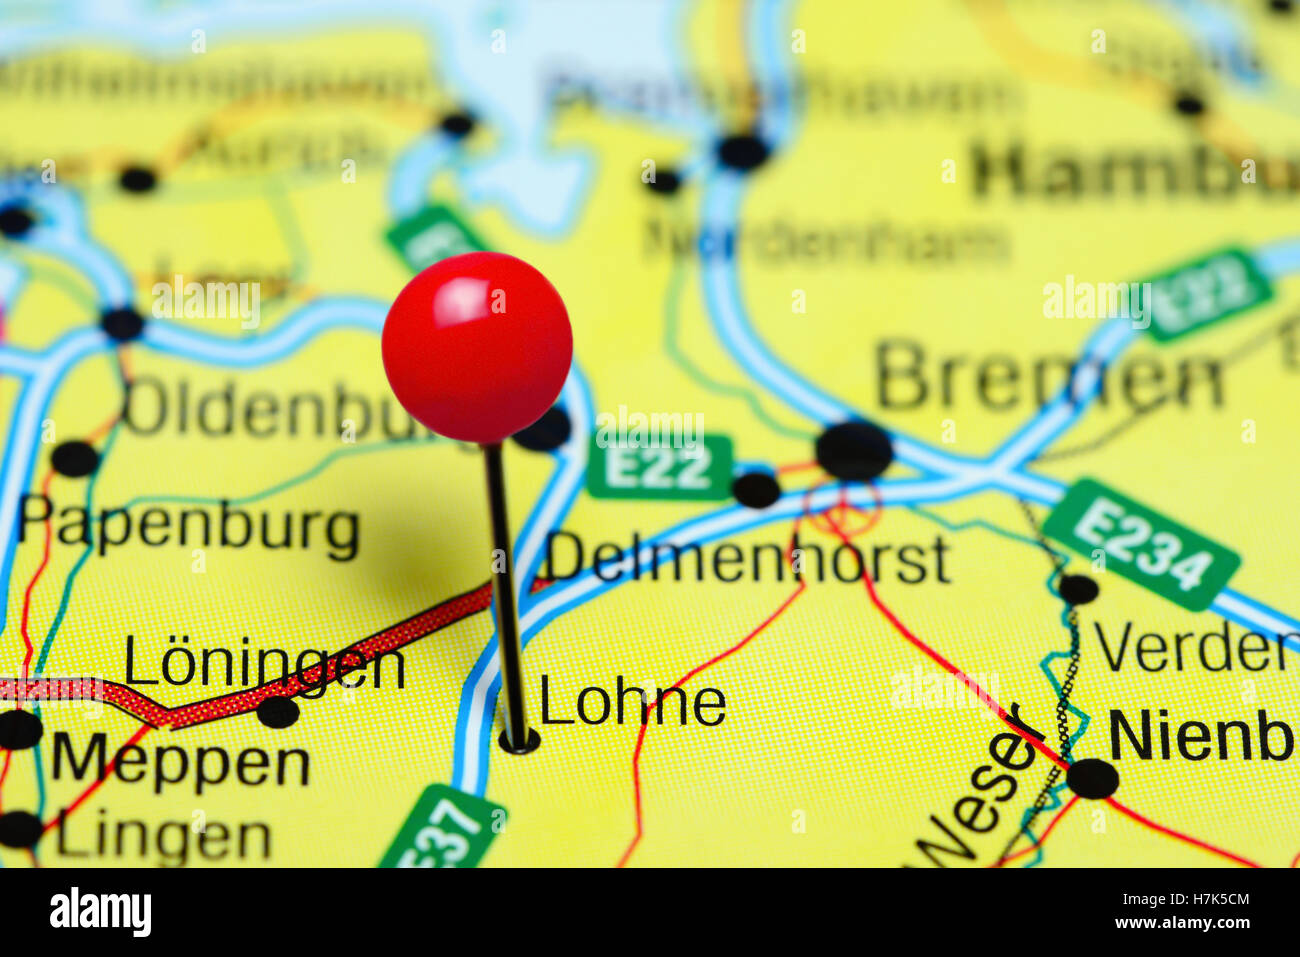 Lohne pinned on a map of Germany Stock Photo